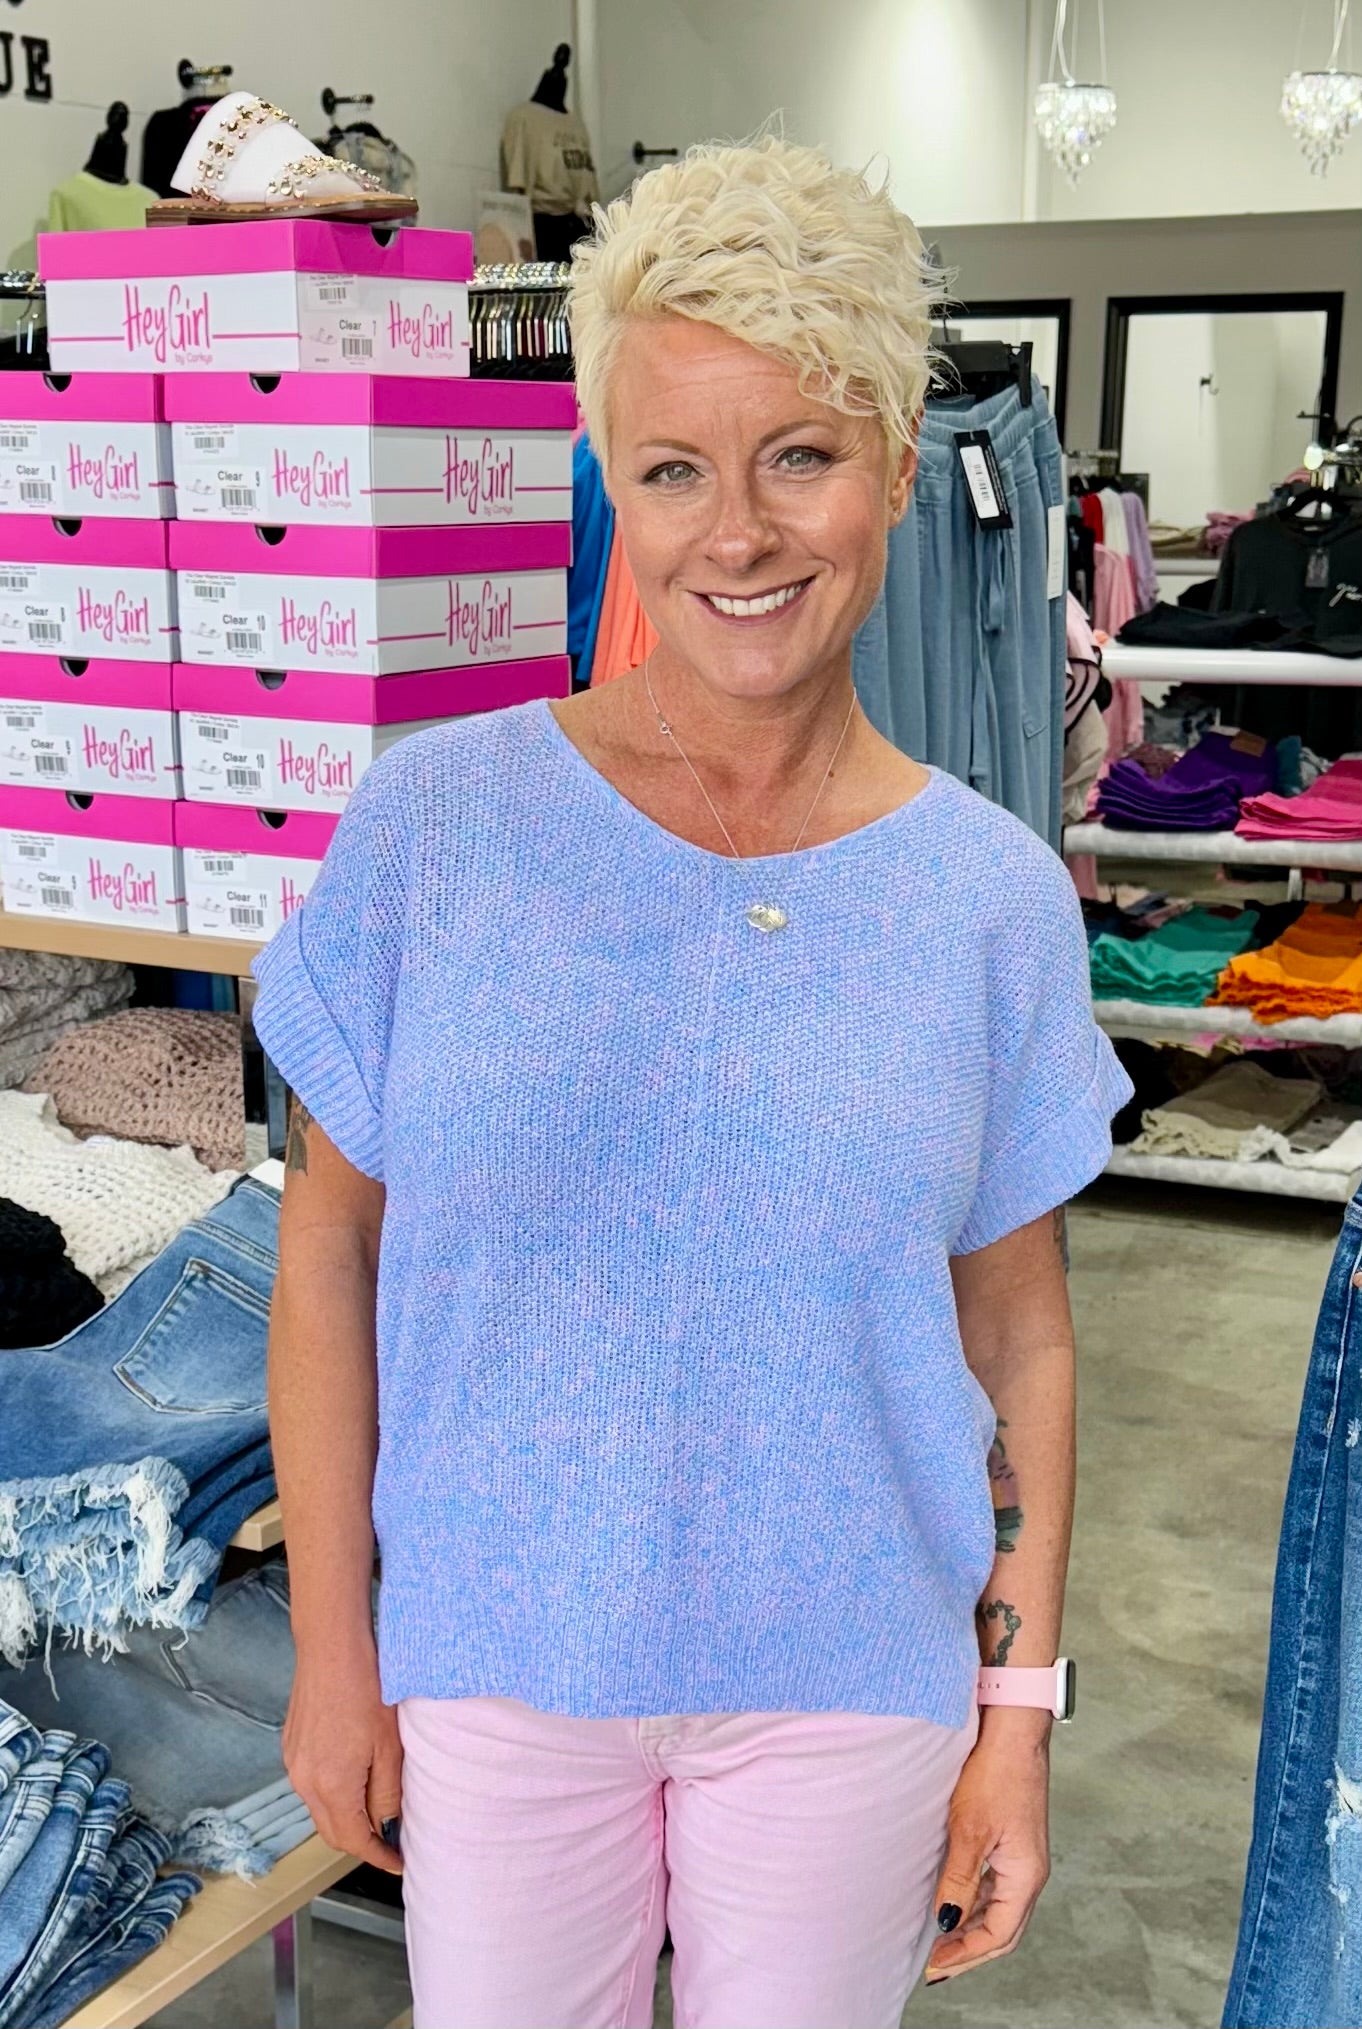 The Periwinkle Dream Top